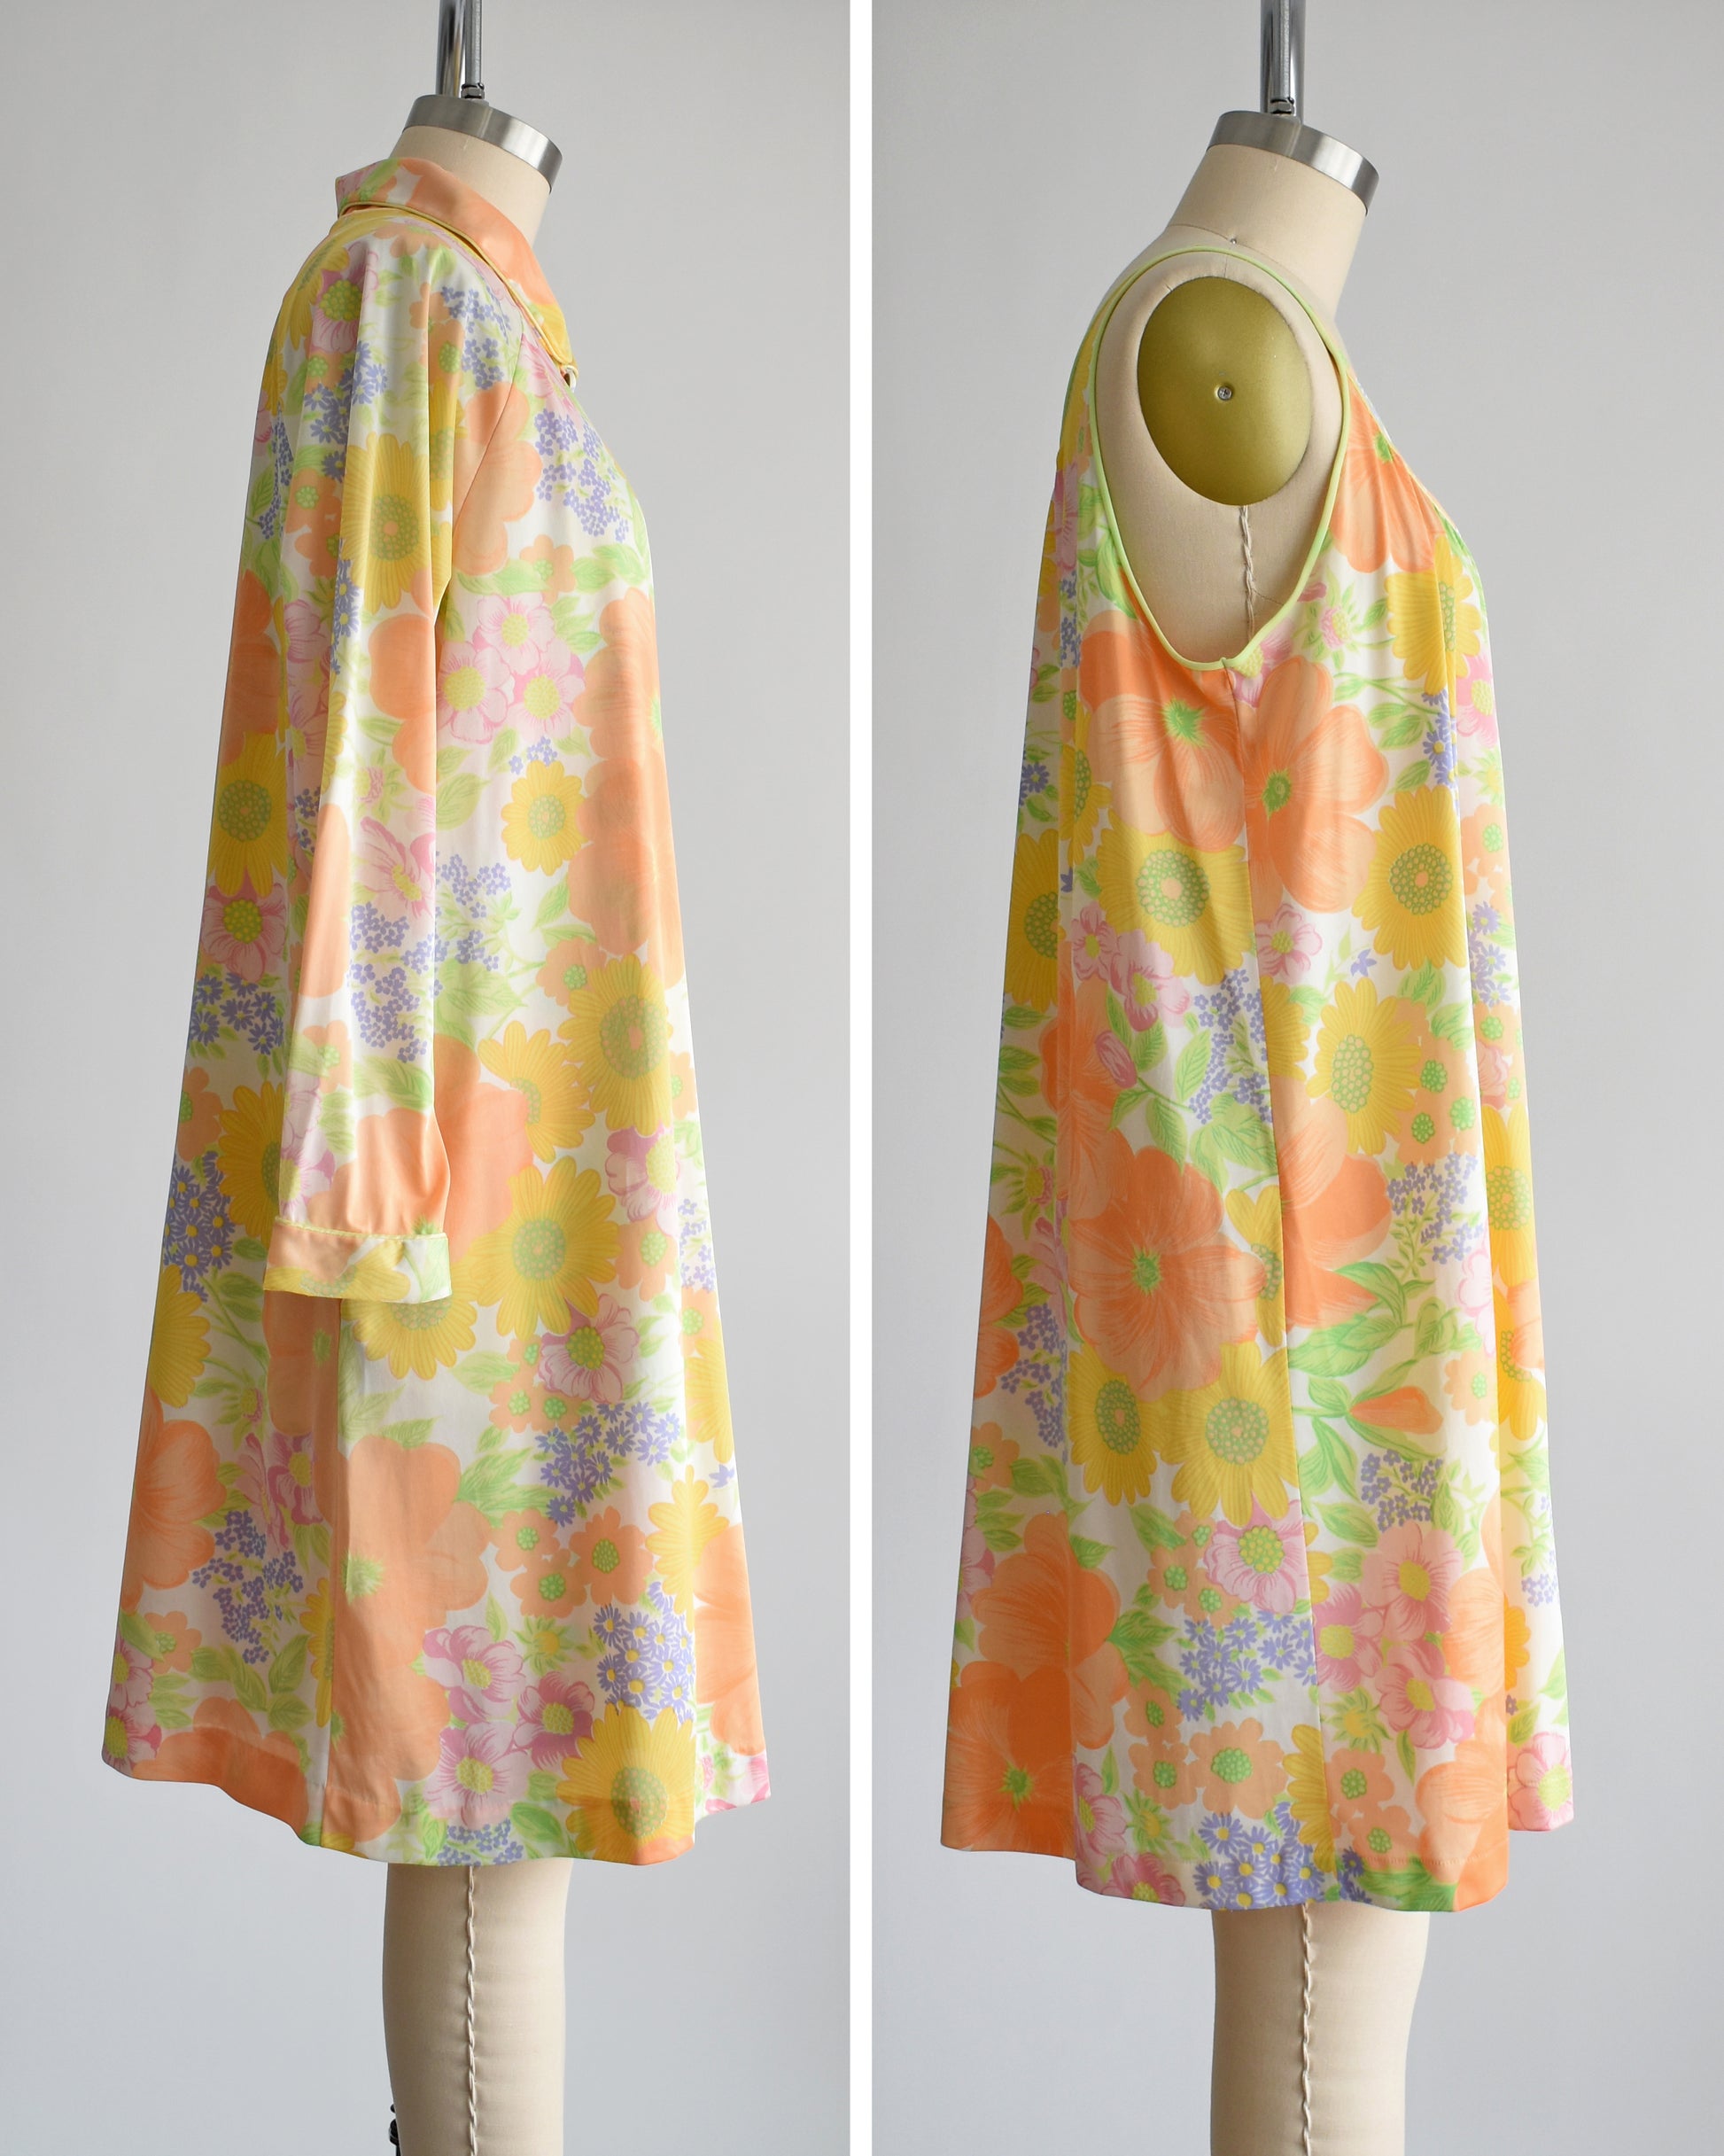 Side view of a vintage 1970s floral peignoir set by Lorraine. This set includes a nightgown and matching button up long sleeve robe that is white and has an orange, yellow, pink, purple, and green floral print. The robe is off in the right photo. 